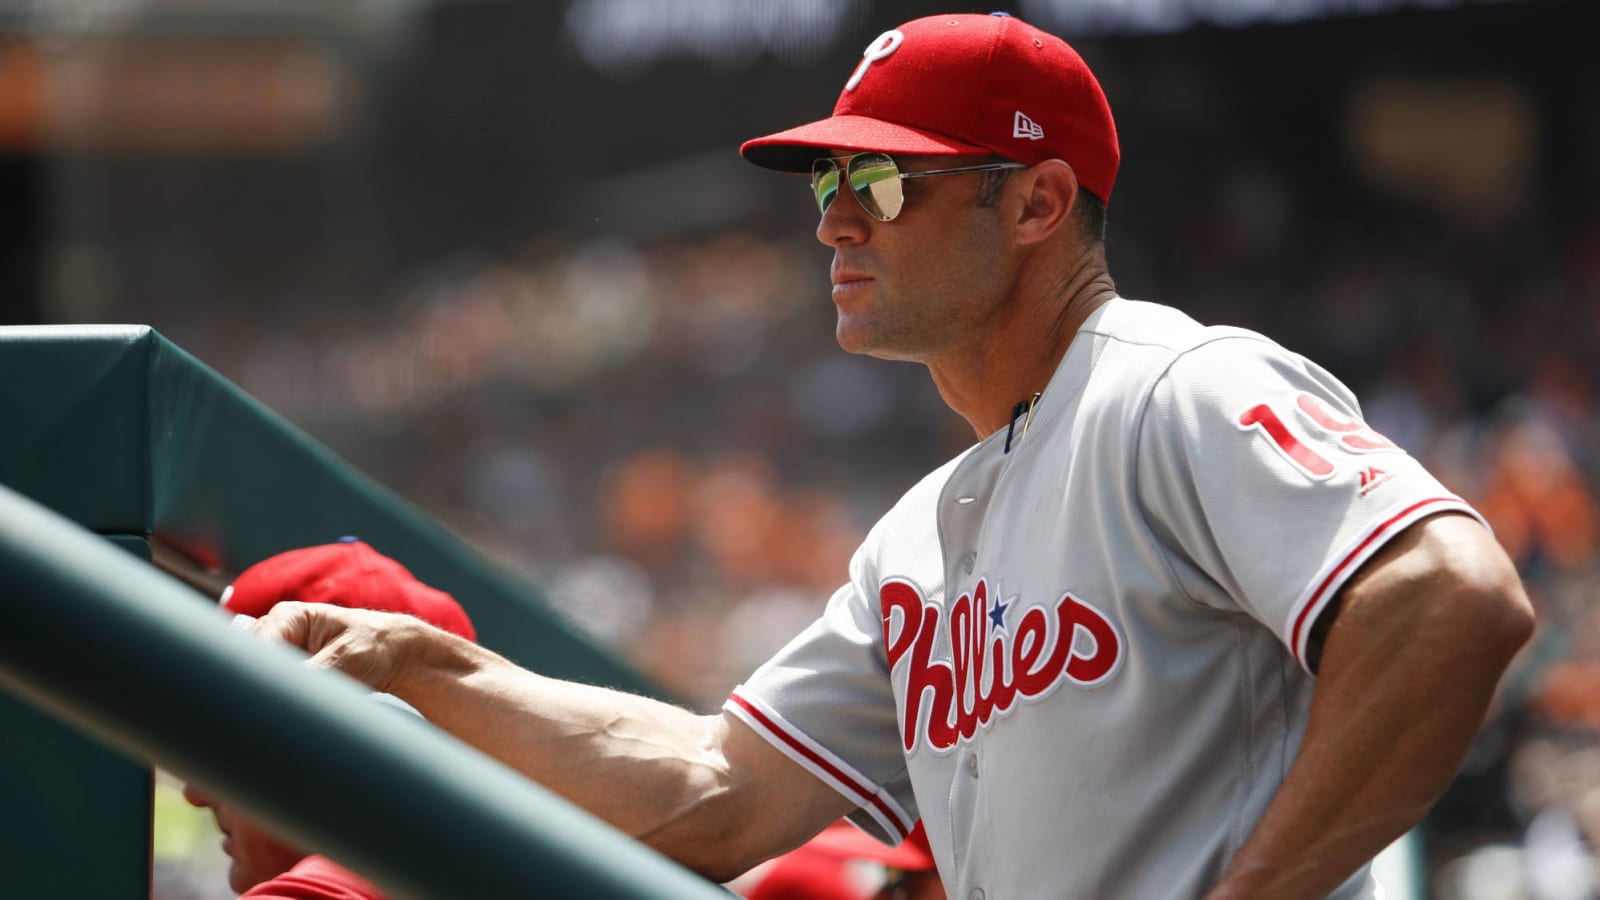 Gabe Kapler puts on push-up clinic before Phillies game